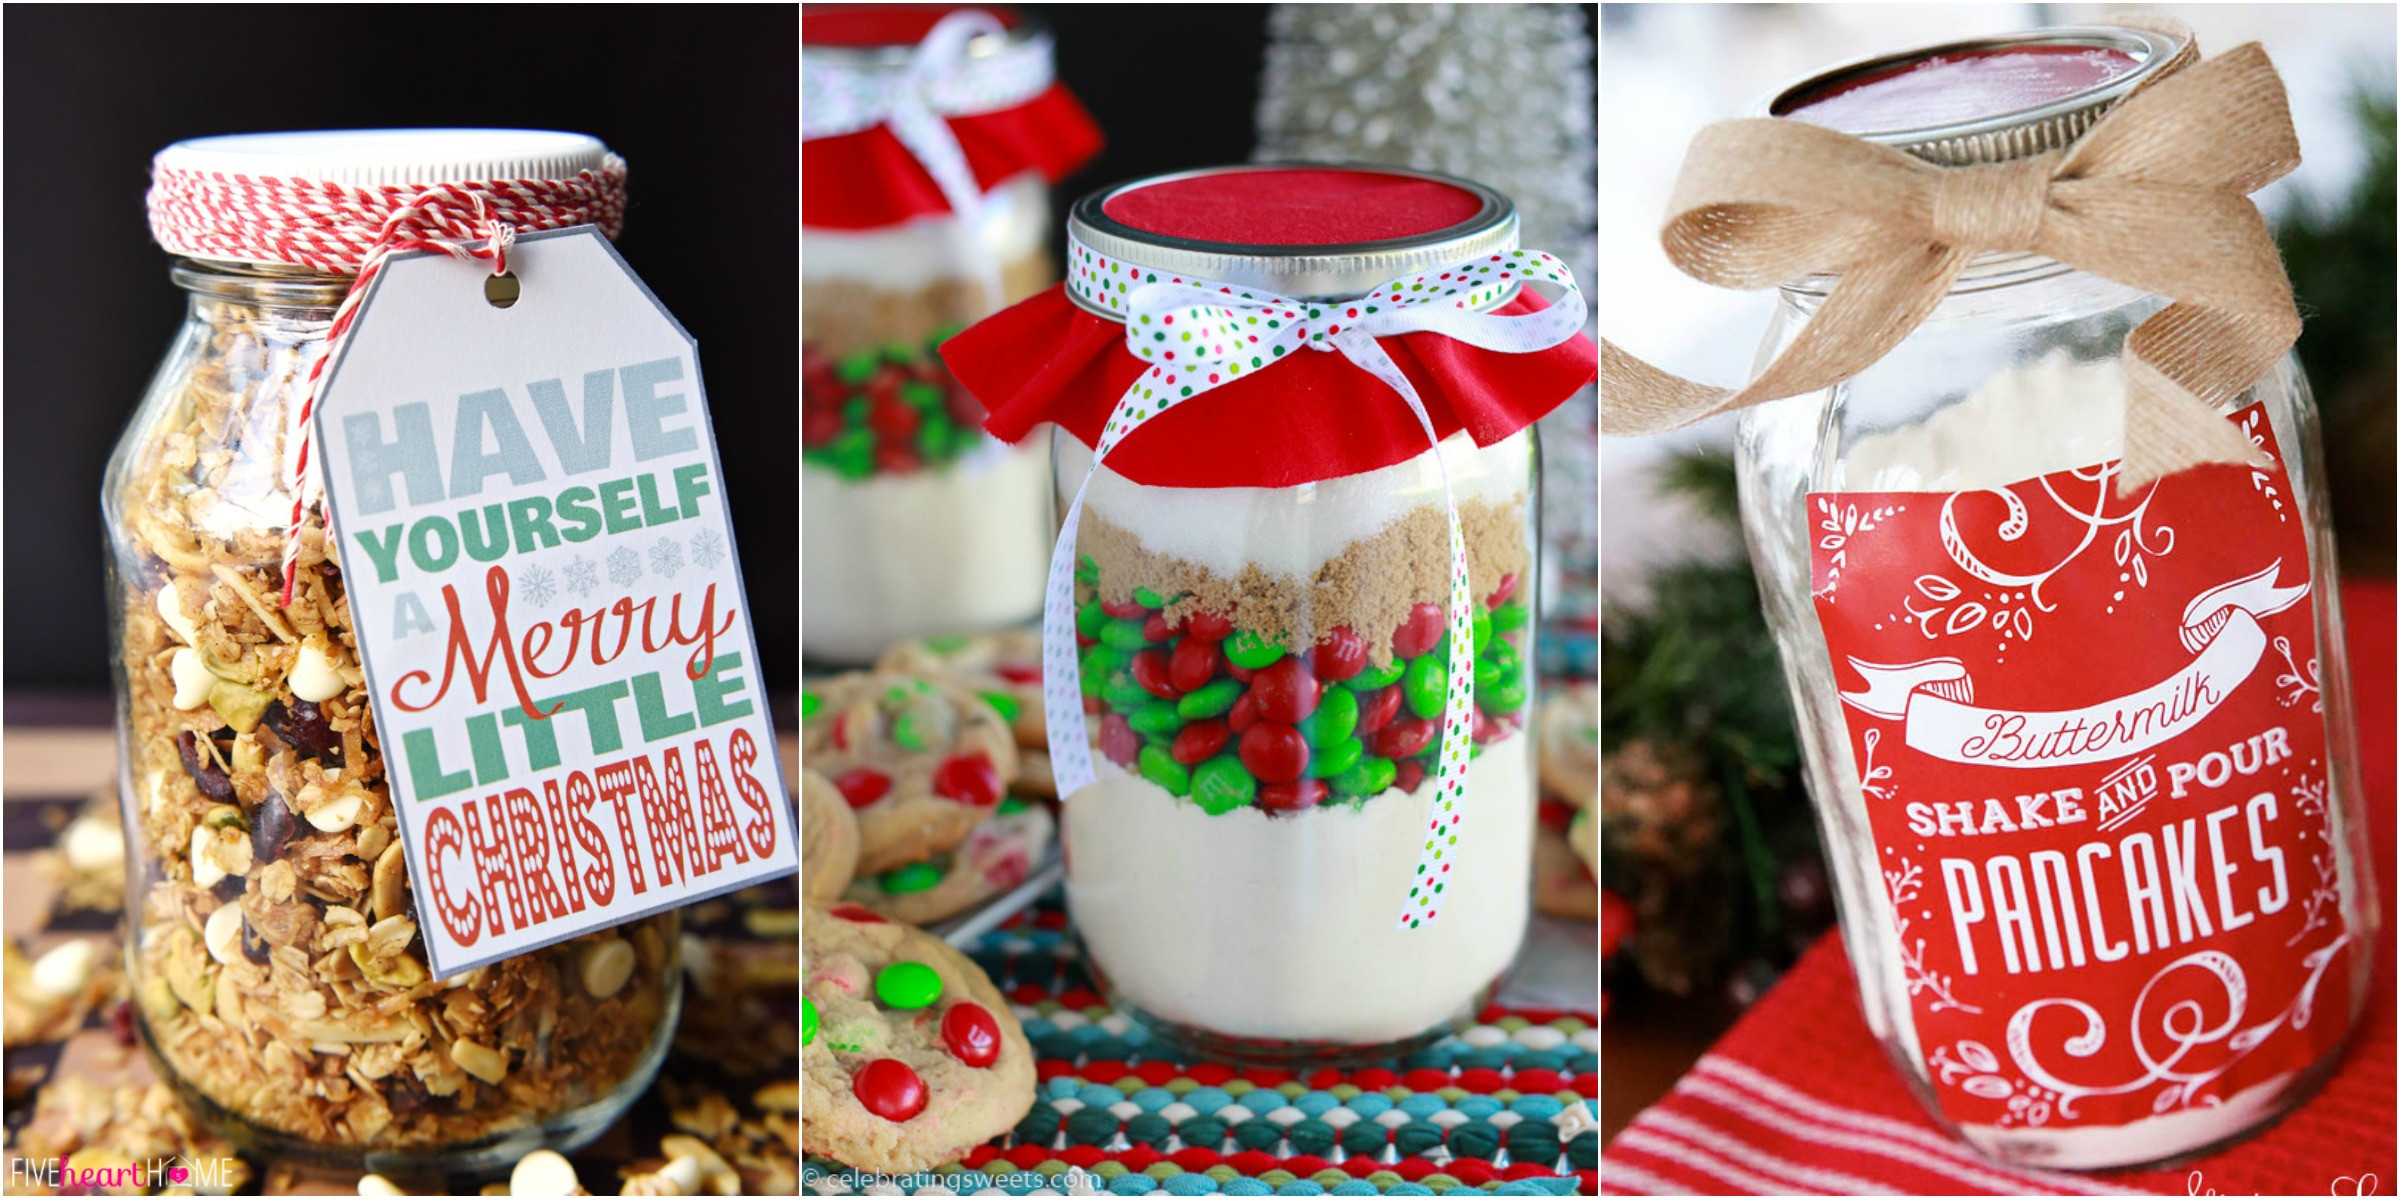 Christmas Food Gift Ideas
 34 Mason Jar Christmas Food Gifts – Recipes for Gifts in a